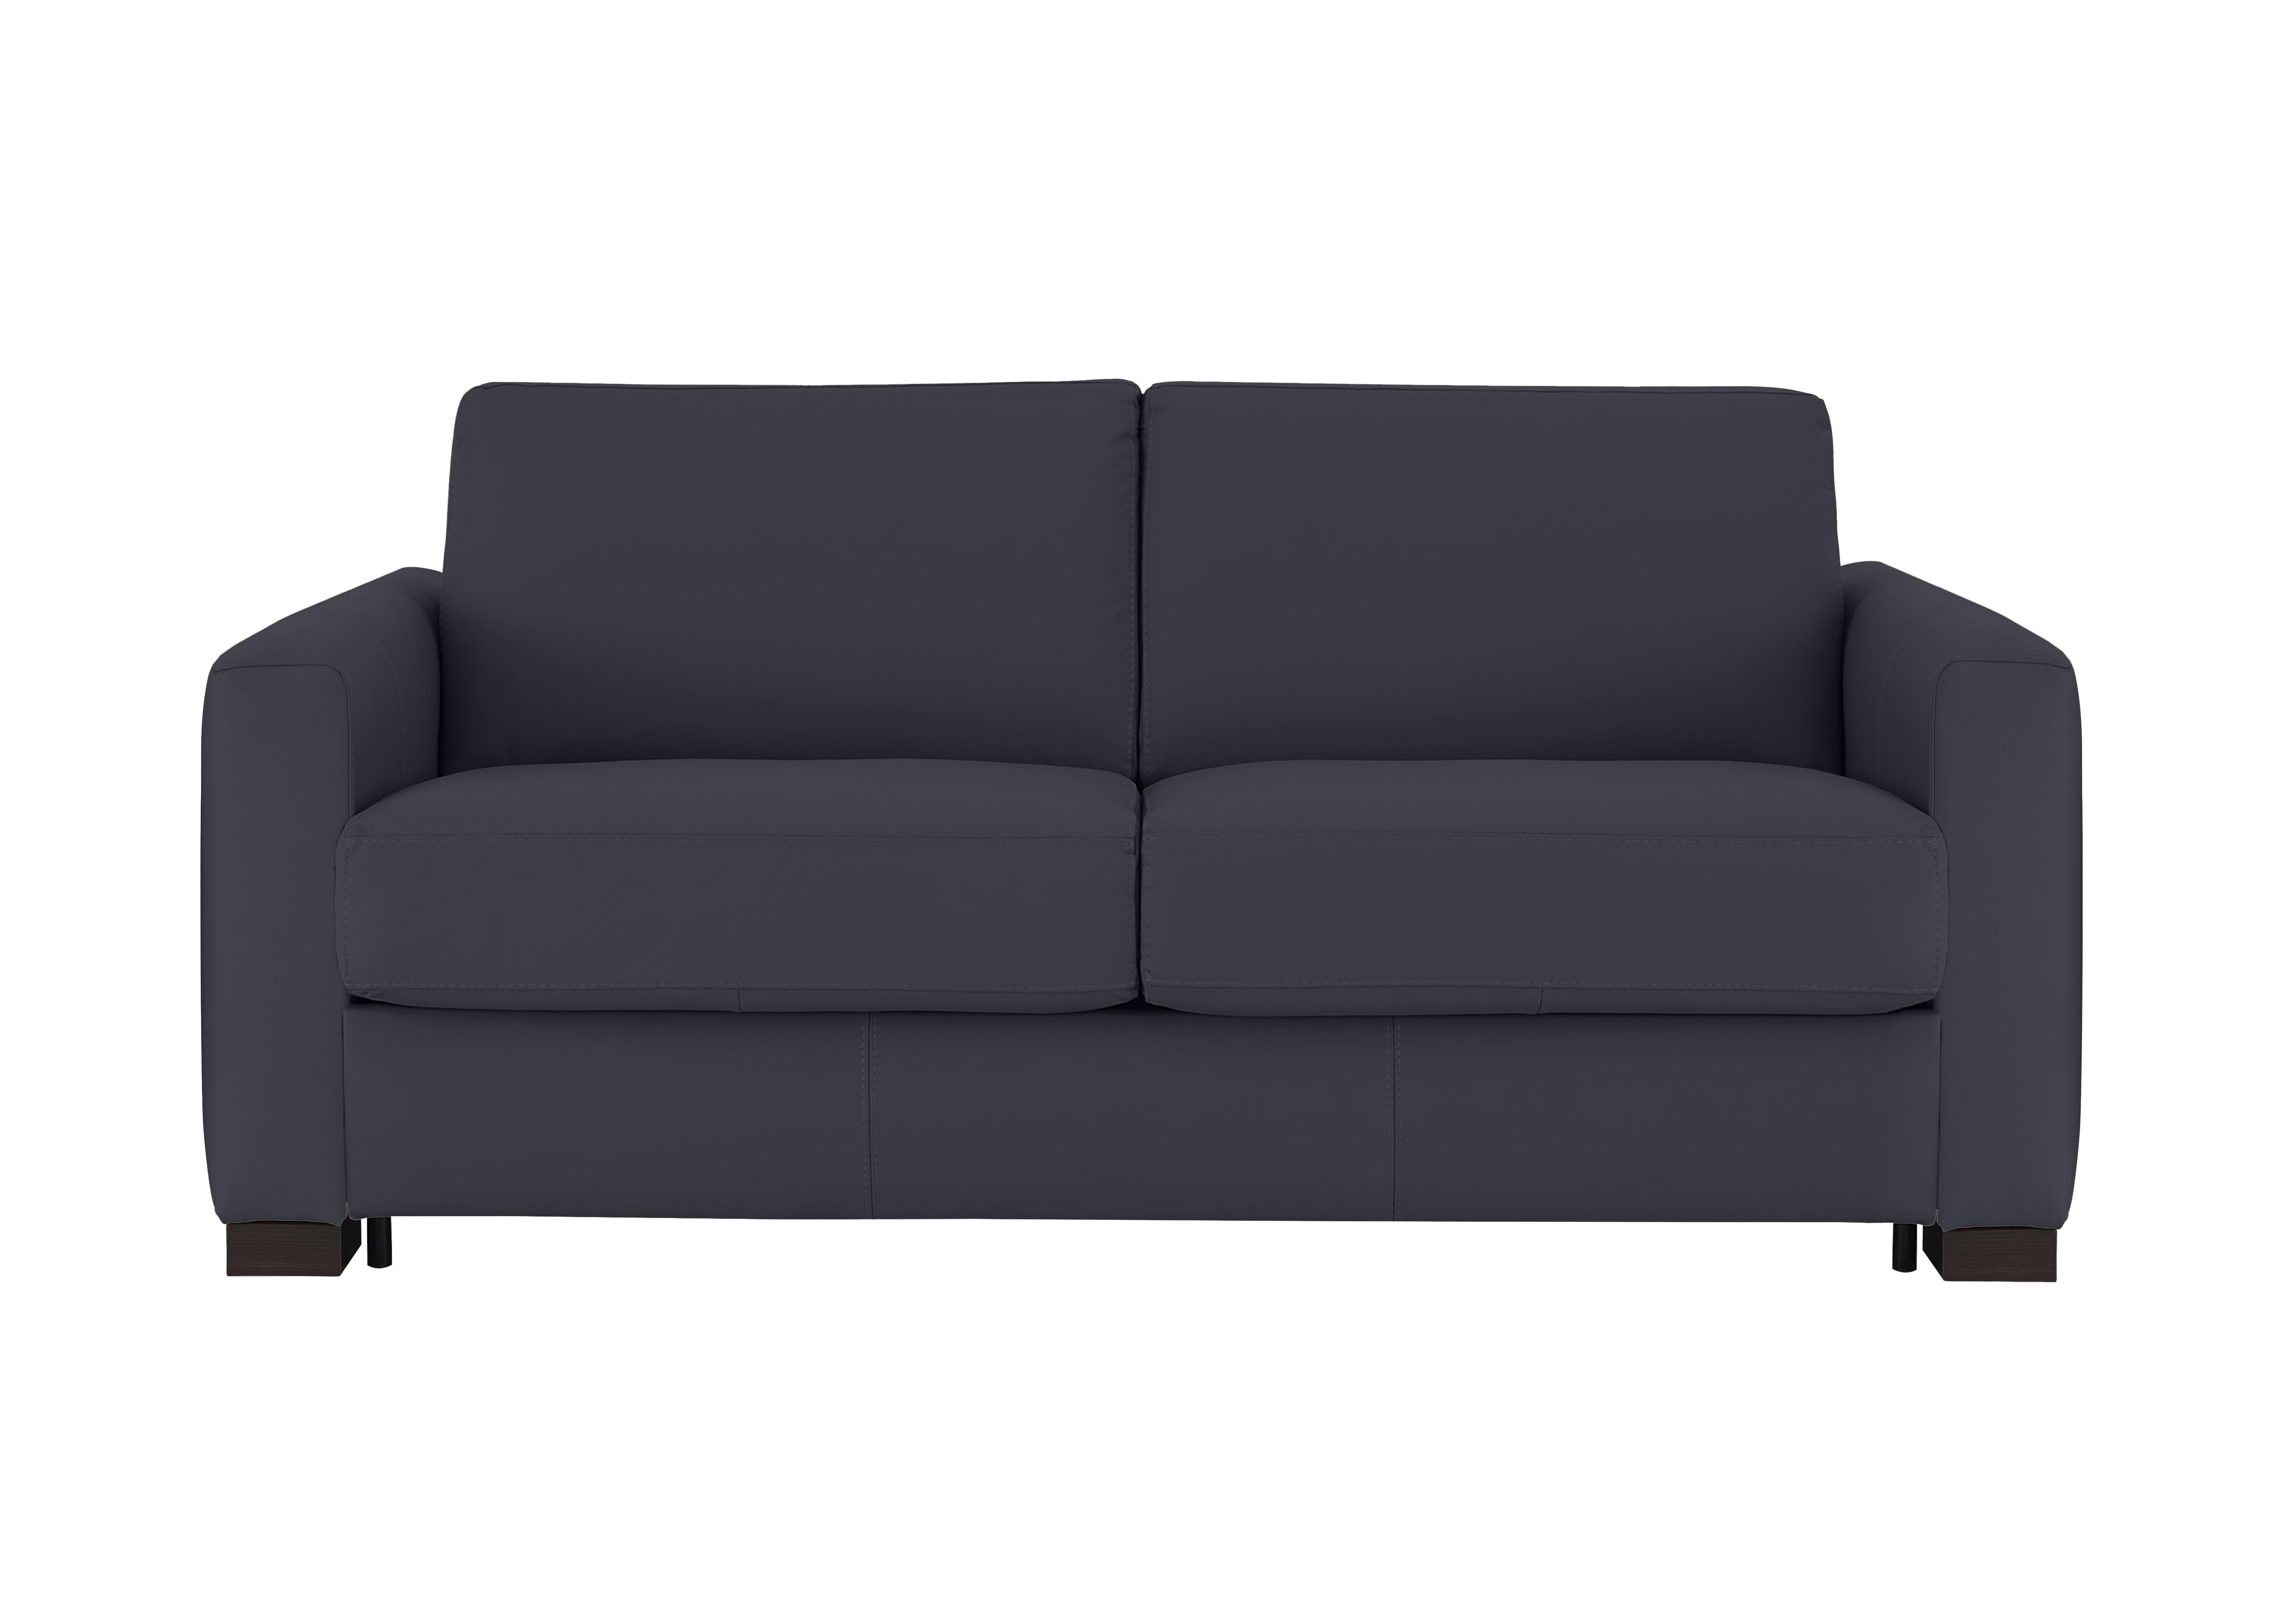 Alcova 2.5 Seater Leather Sofa Bed with Box Arms in Torello Blu 81 on Furniture Village